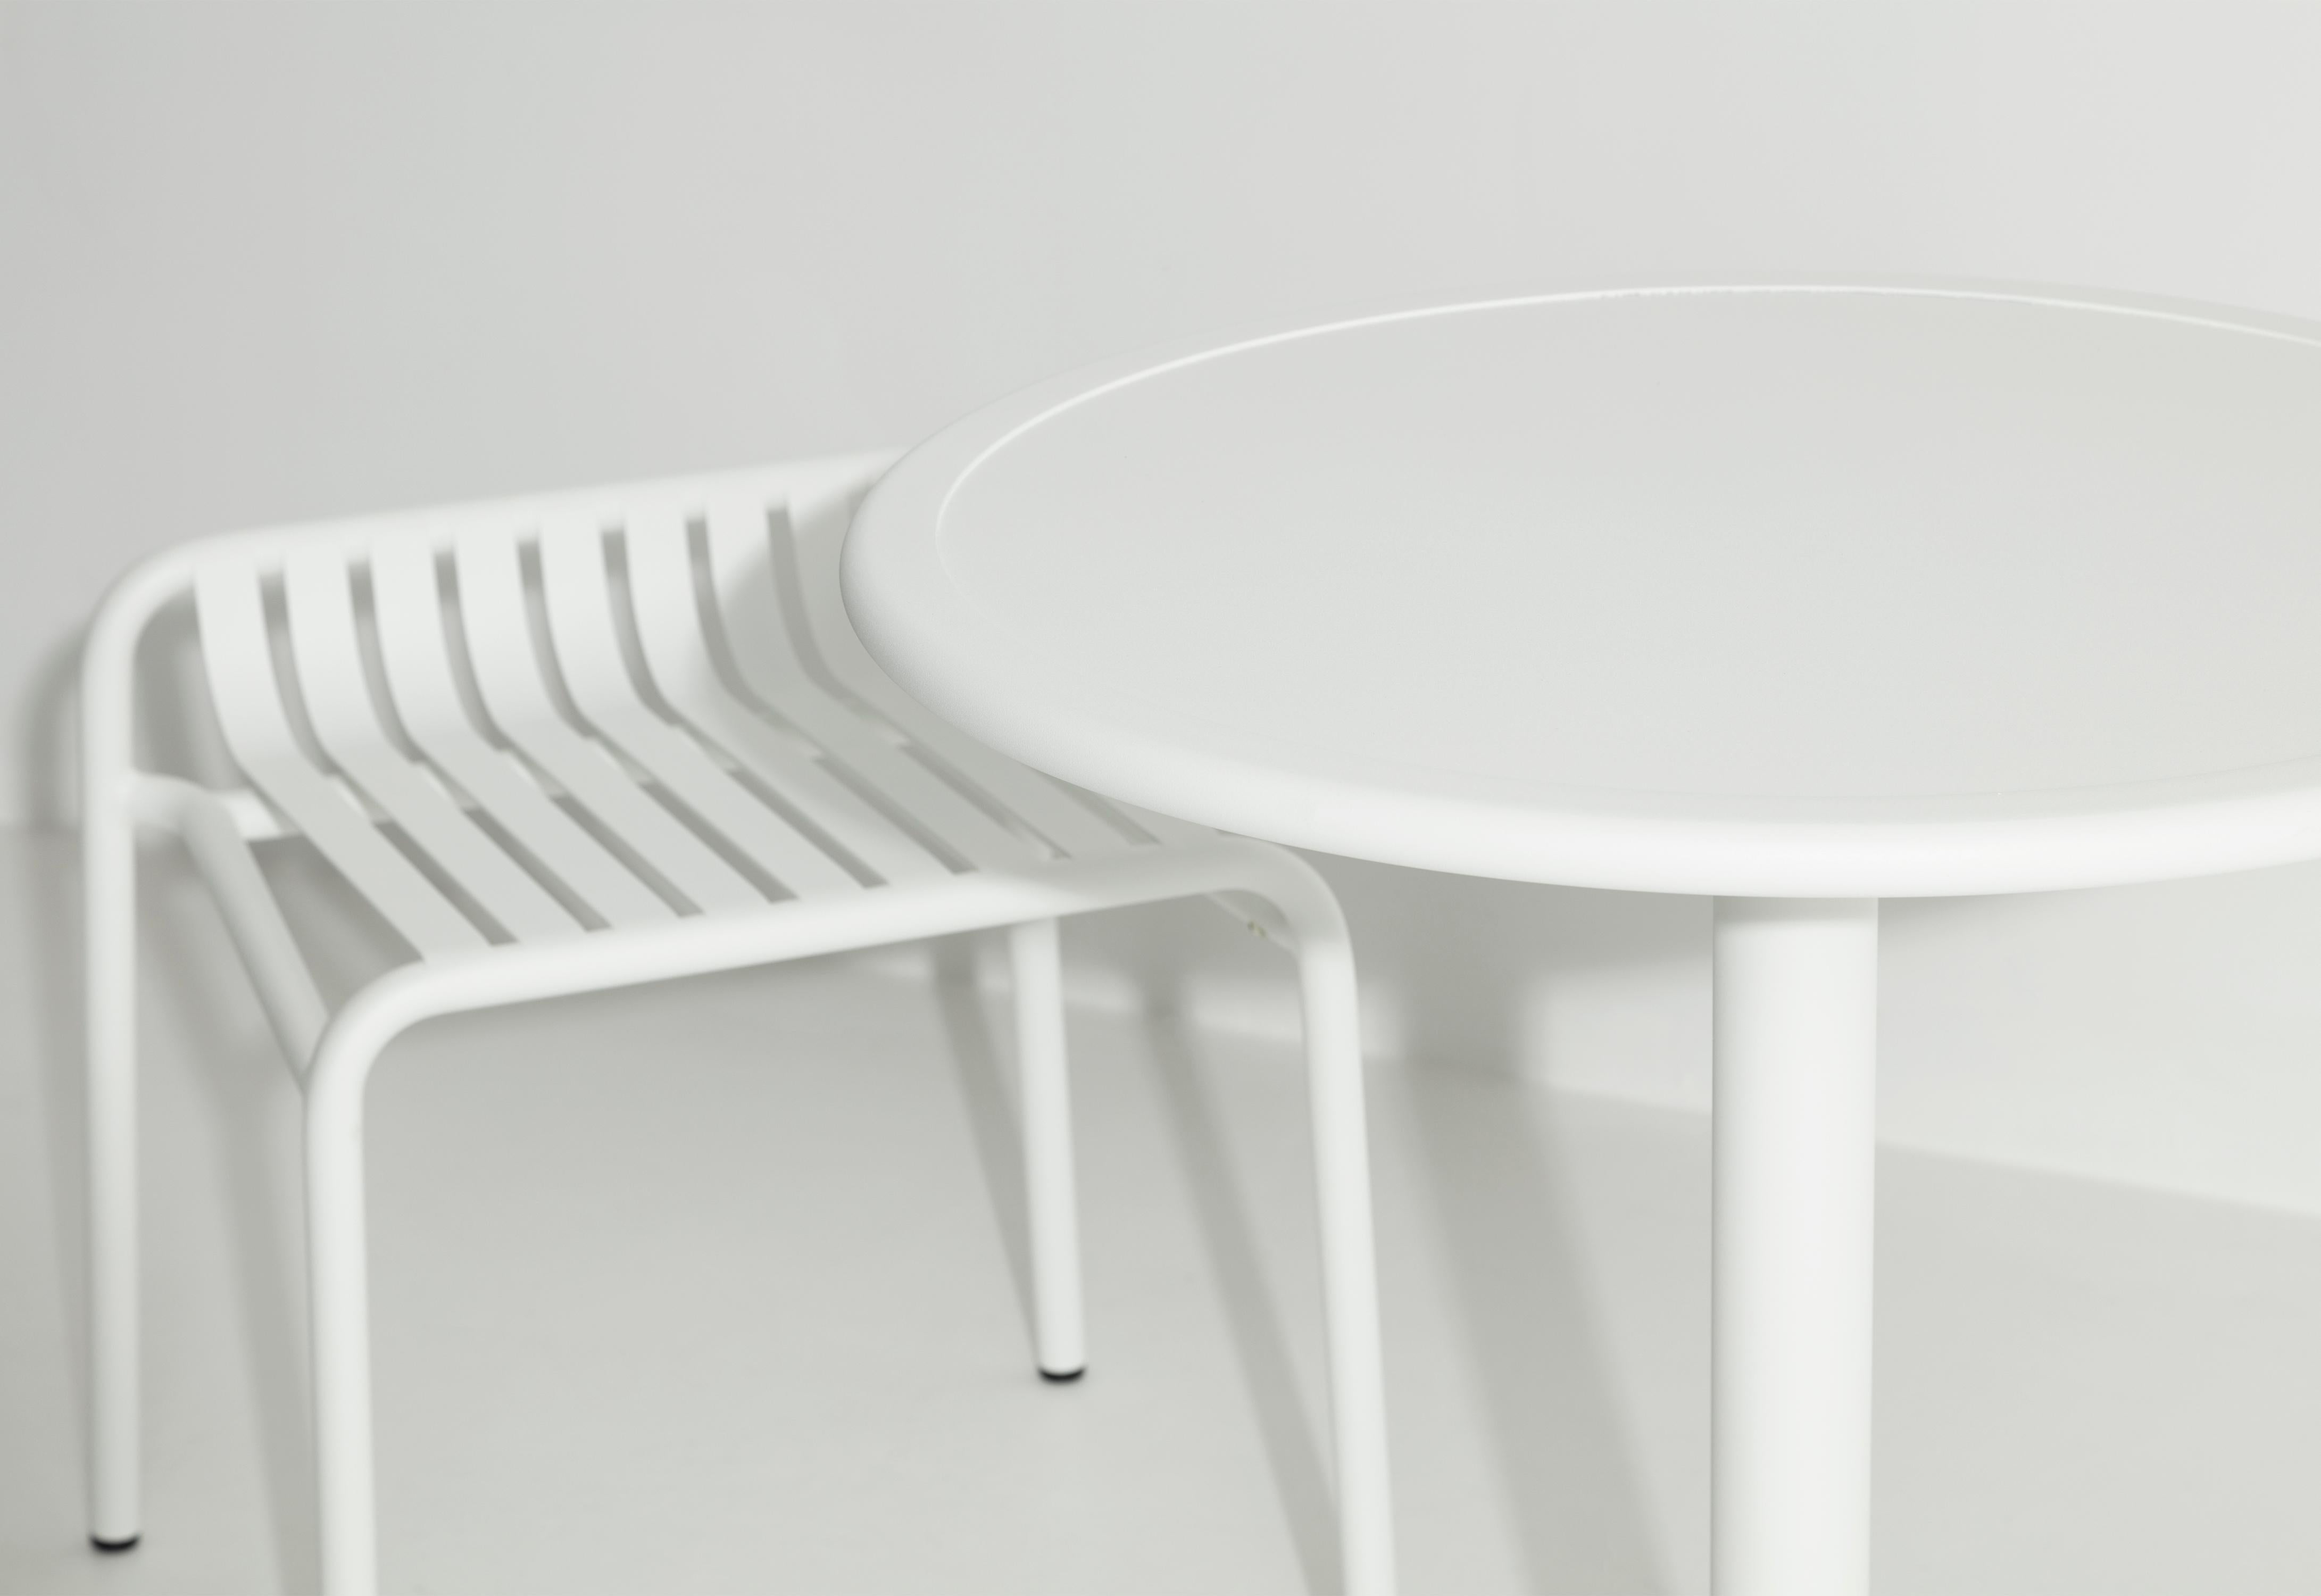 Petite Friture Week-End Bistro Round Dining Table in White Aluminium by Studio BrichetZiegler, 2017

The week-end collection is a full range of outdoor furniture, in aluminium grained epoxy paint, matt finish, that includes 18 functions and 8